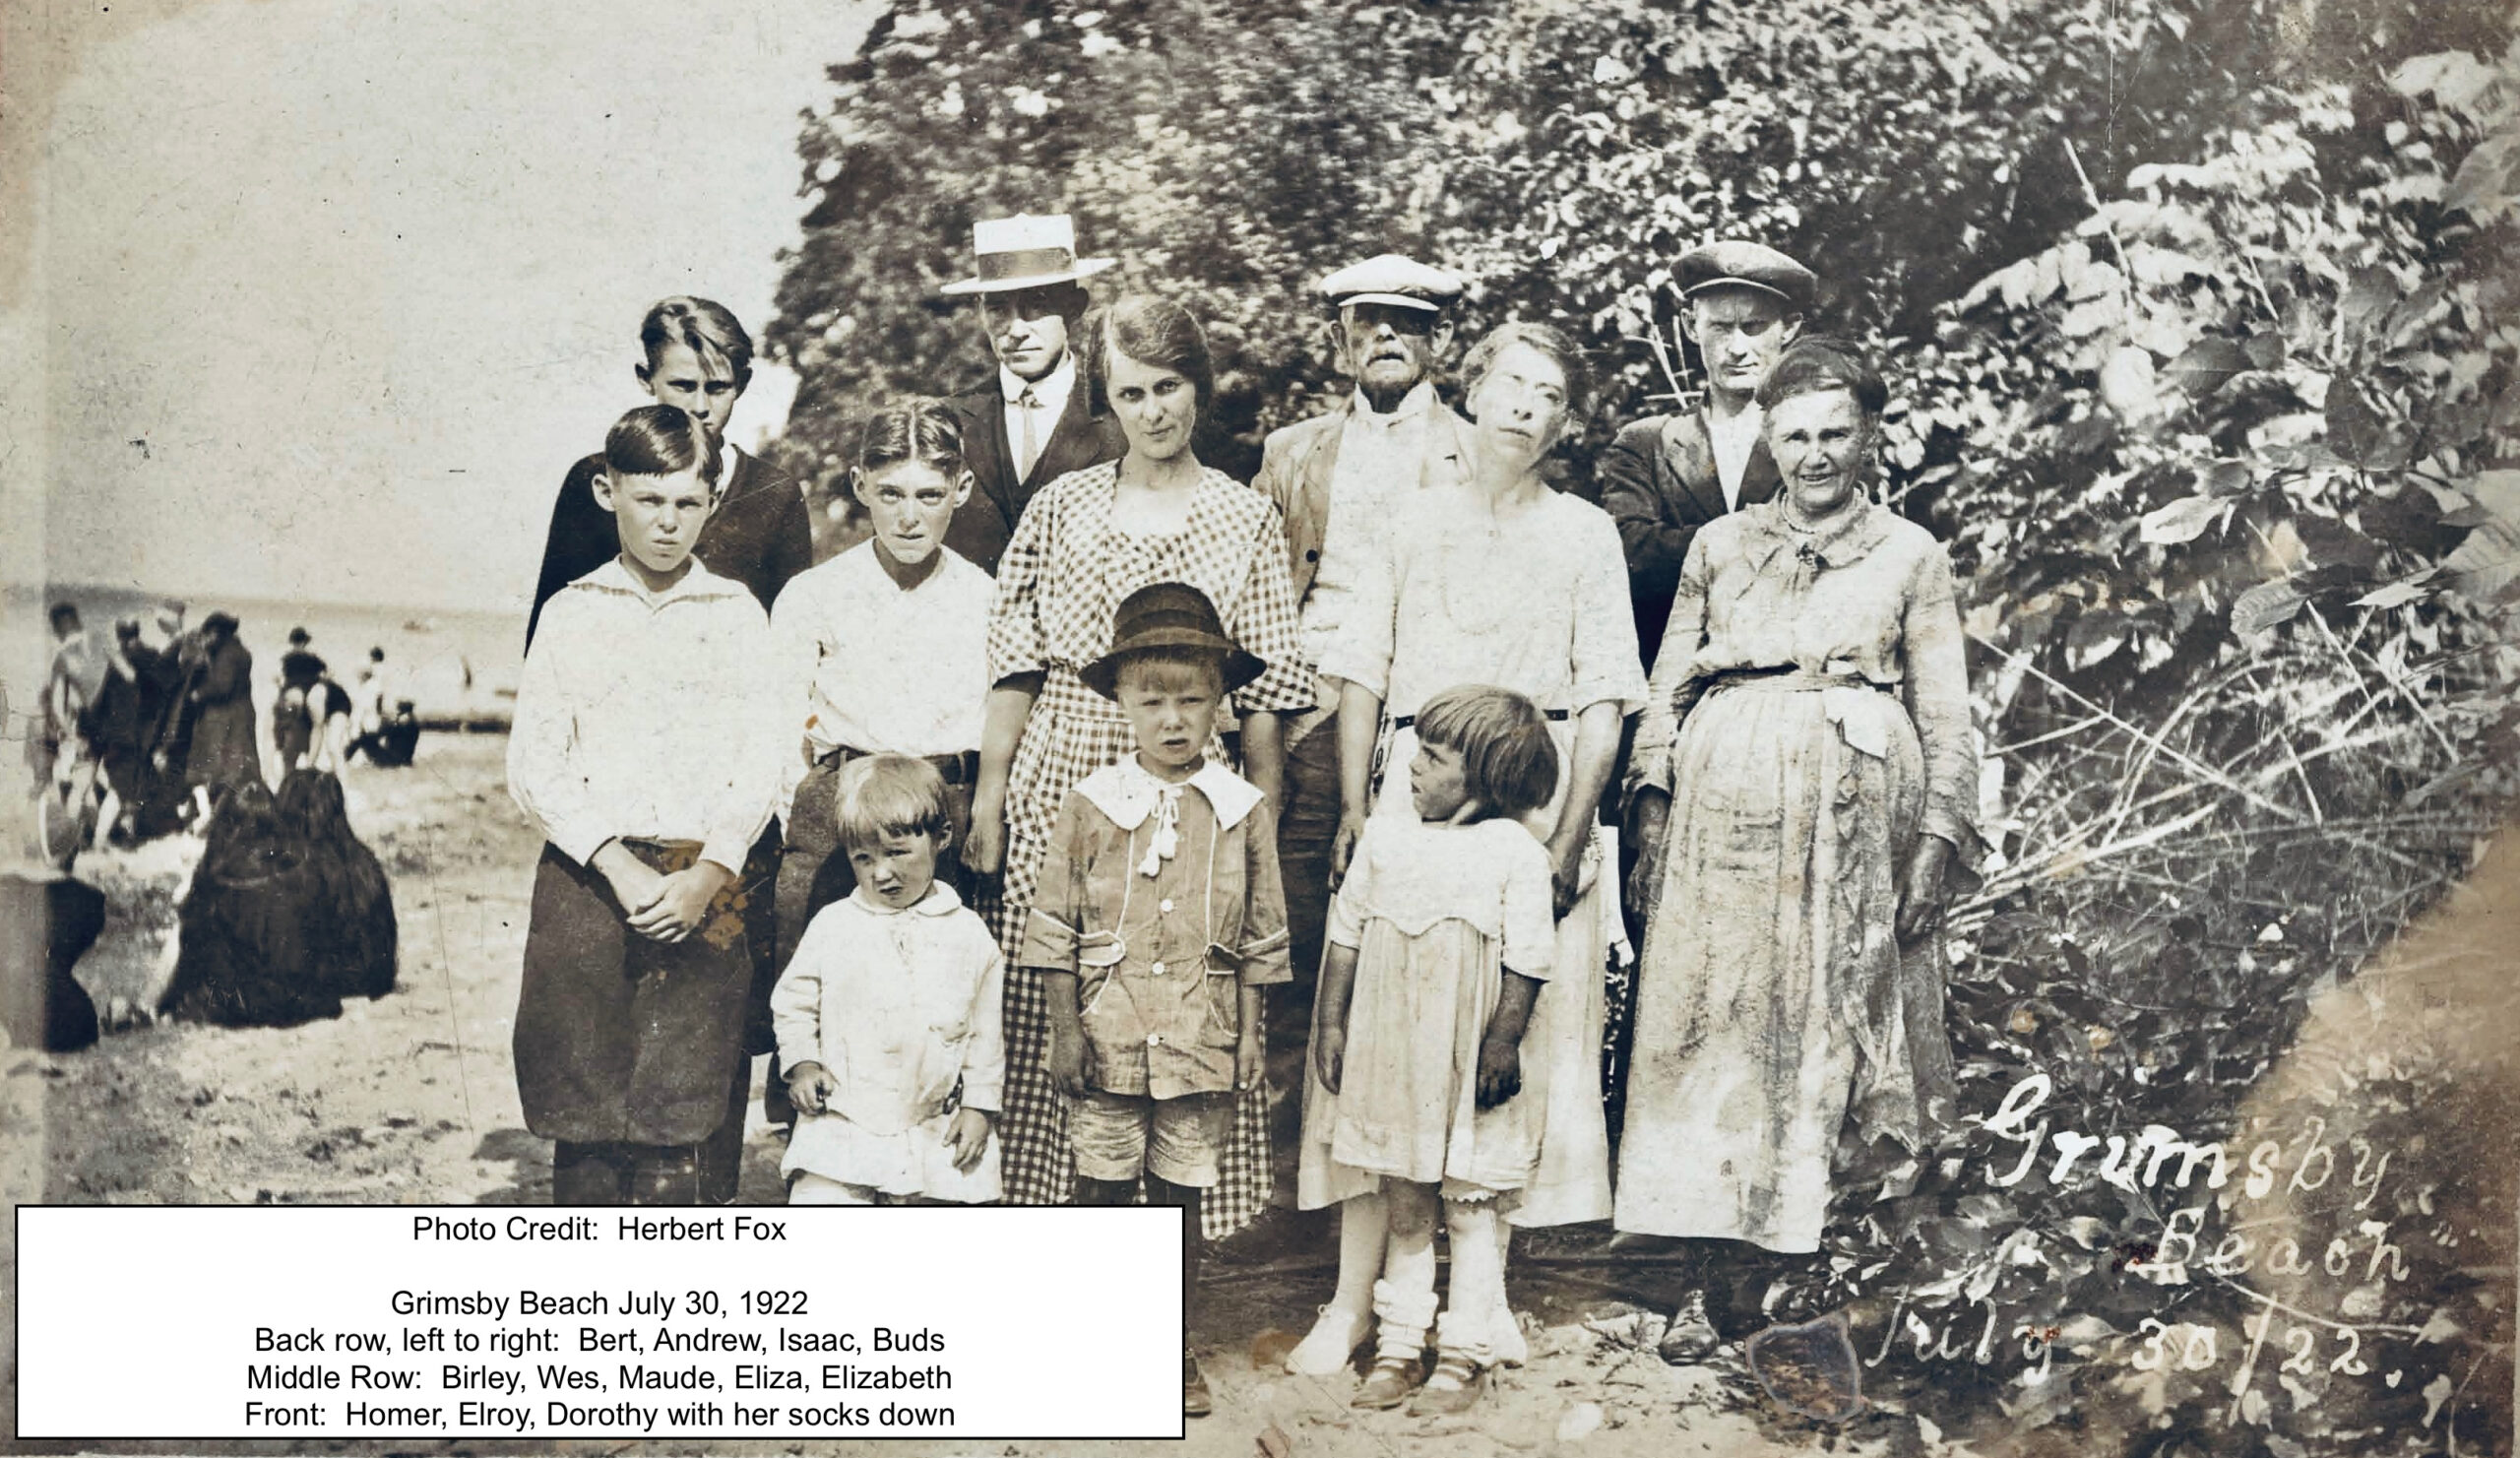 Isaac Arthur and Elizabeth and Children - 2 of 2 (3)